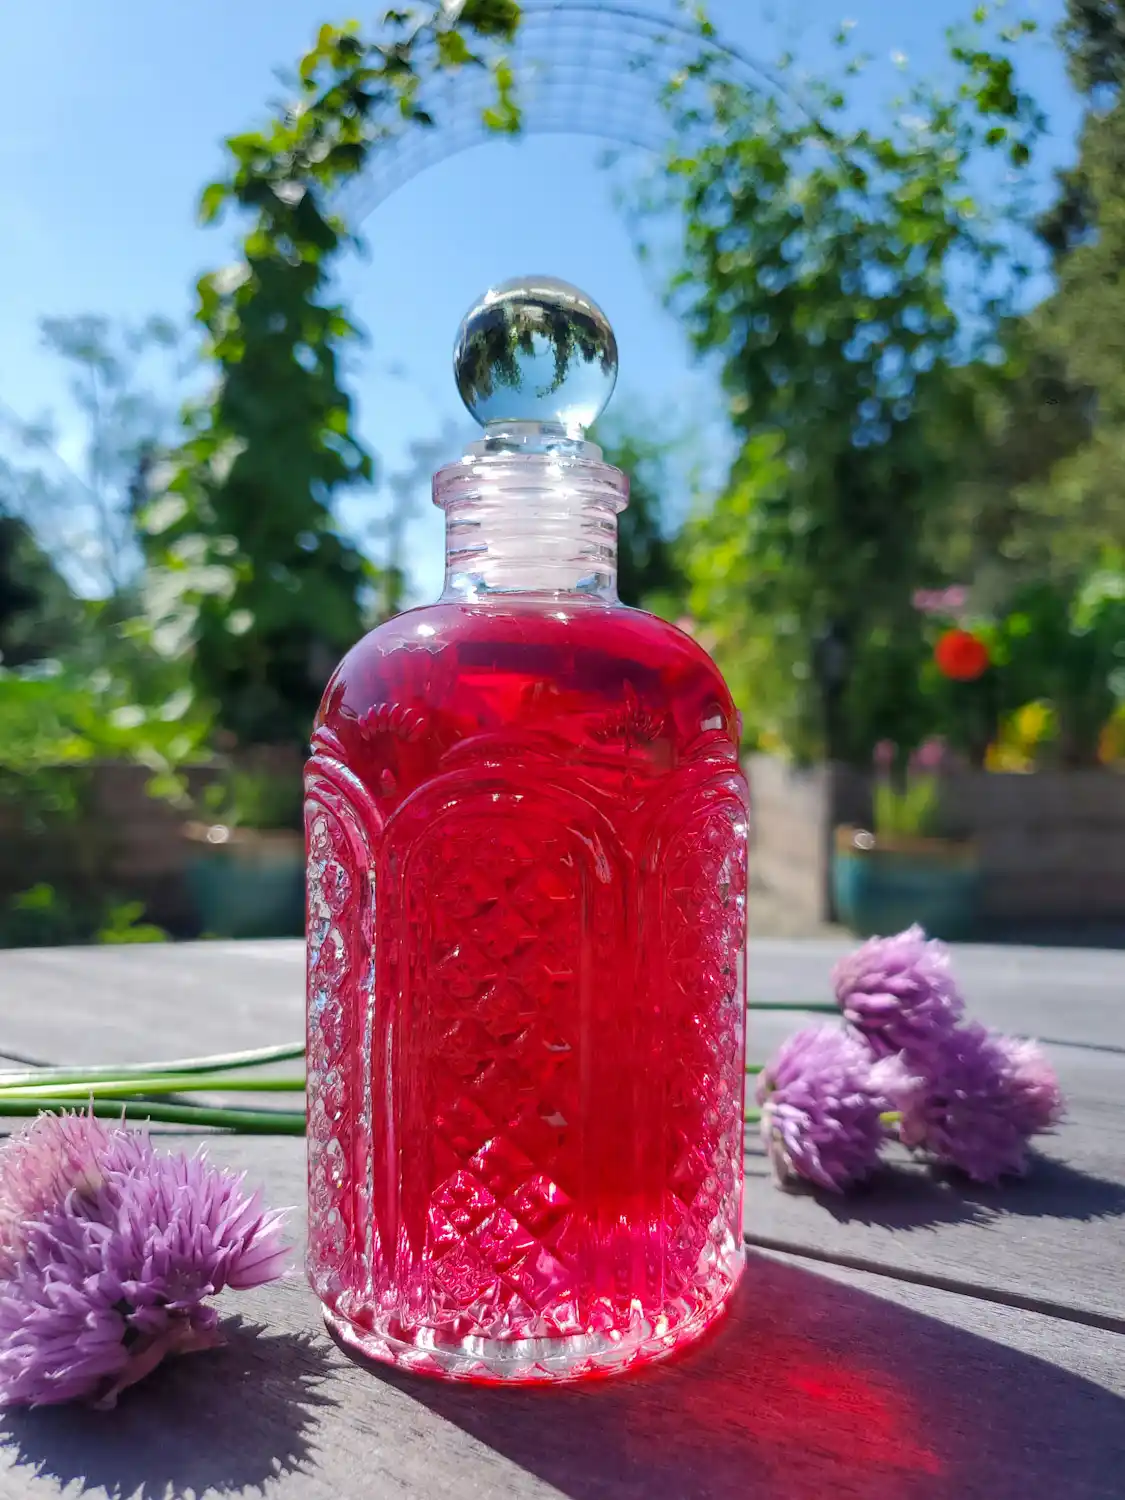 A glass bottle with a glass stopper for the top is full of brilliantly pink to light red chive blossom vinegar. A couple chive greens with blossoms are arrayed next to the jar while an arch full of pole beans and snap peas connecting two raised garden beds is in the background. 